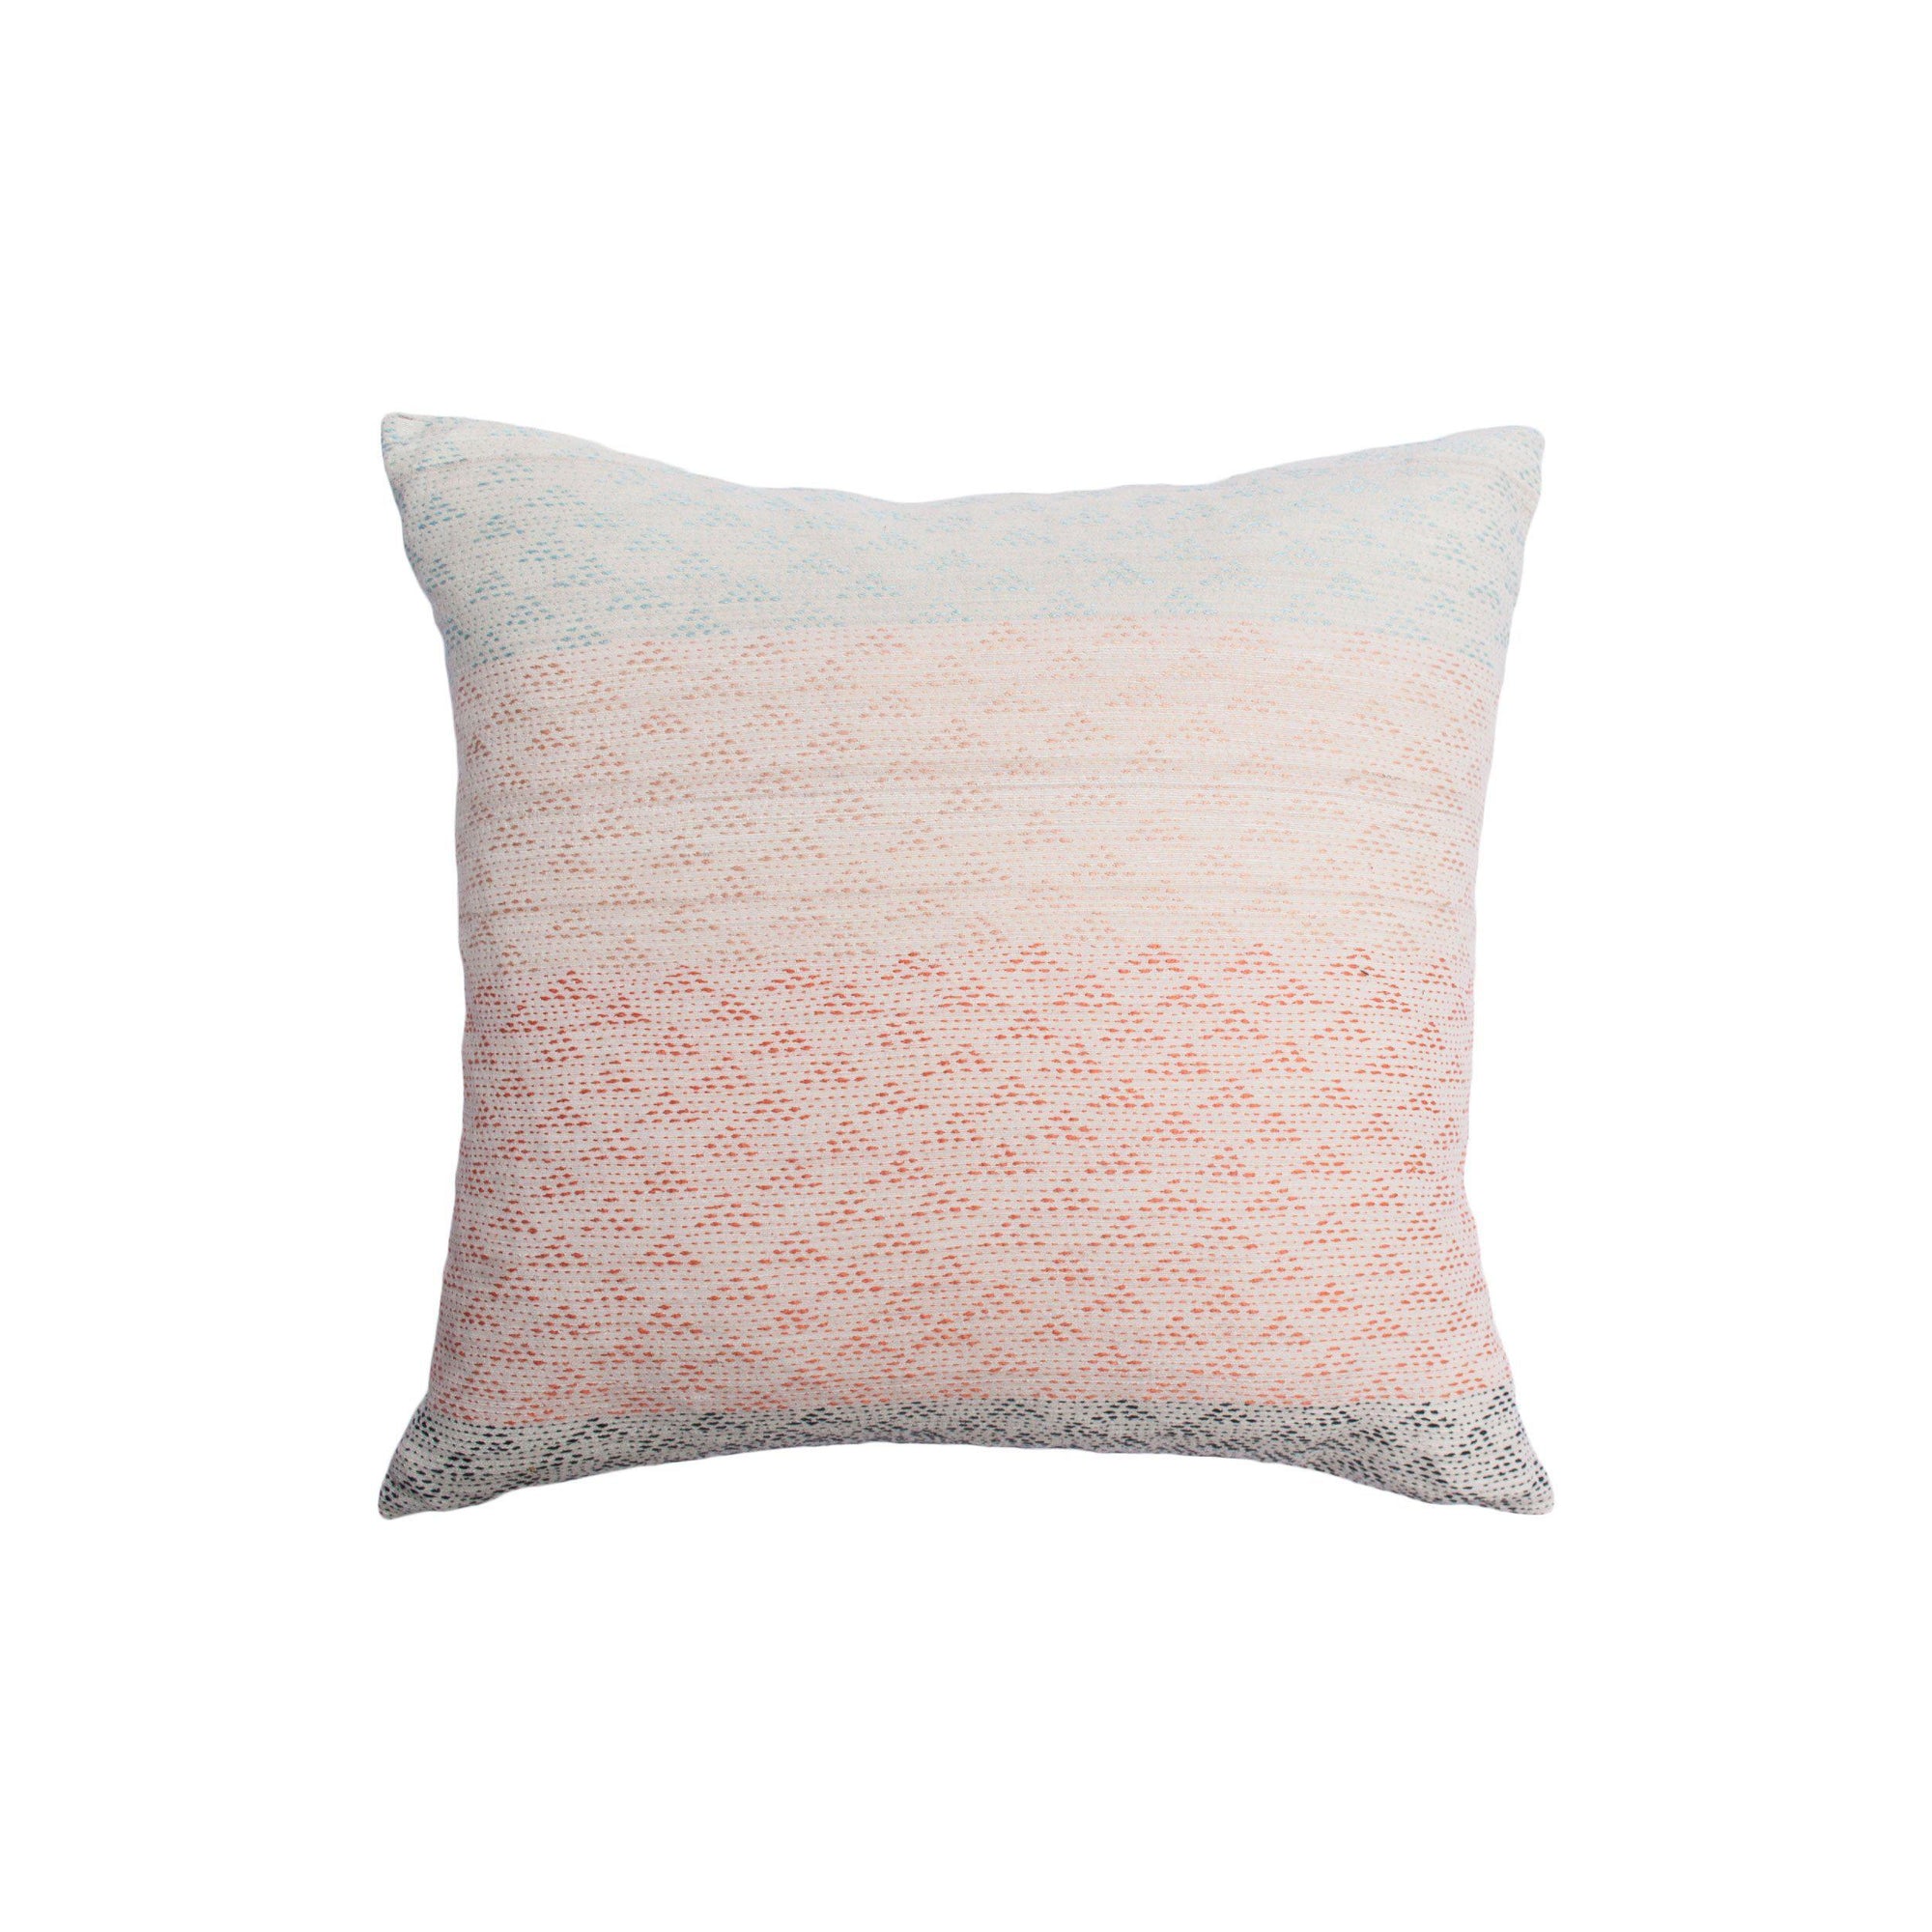 Rugs by Roo | Leah Singh Eva Ivory/Coral Pillow 20X20-H16EVA02